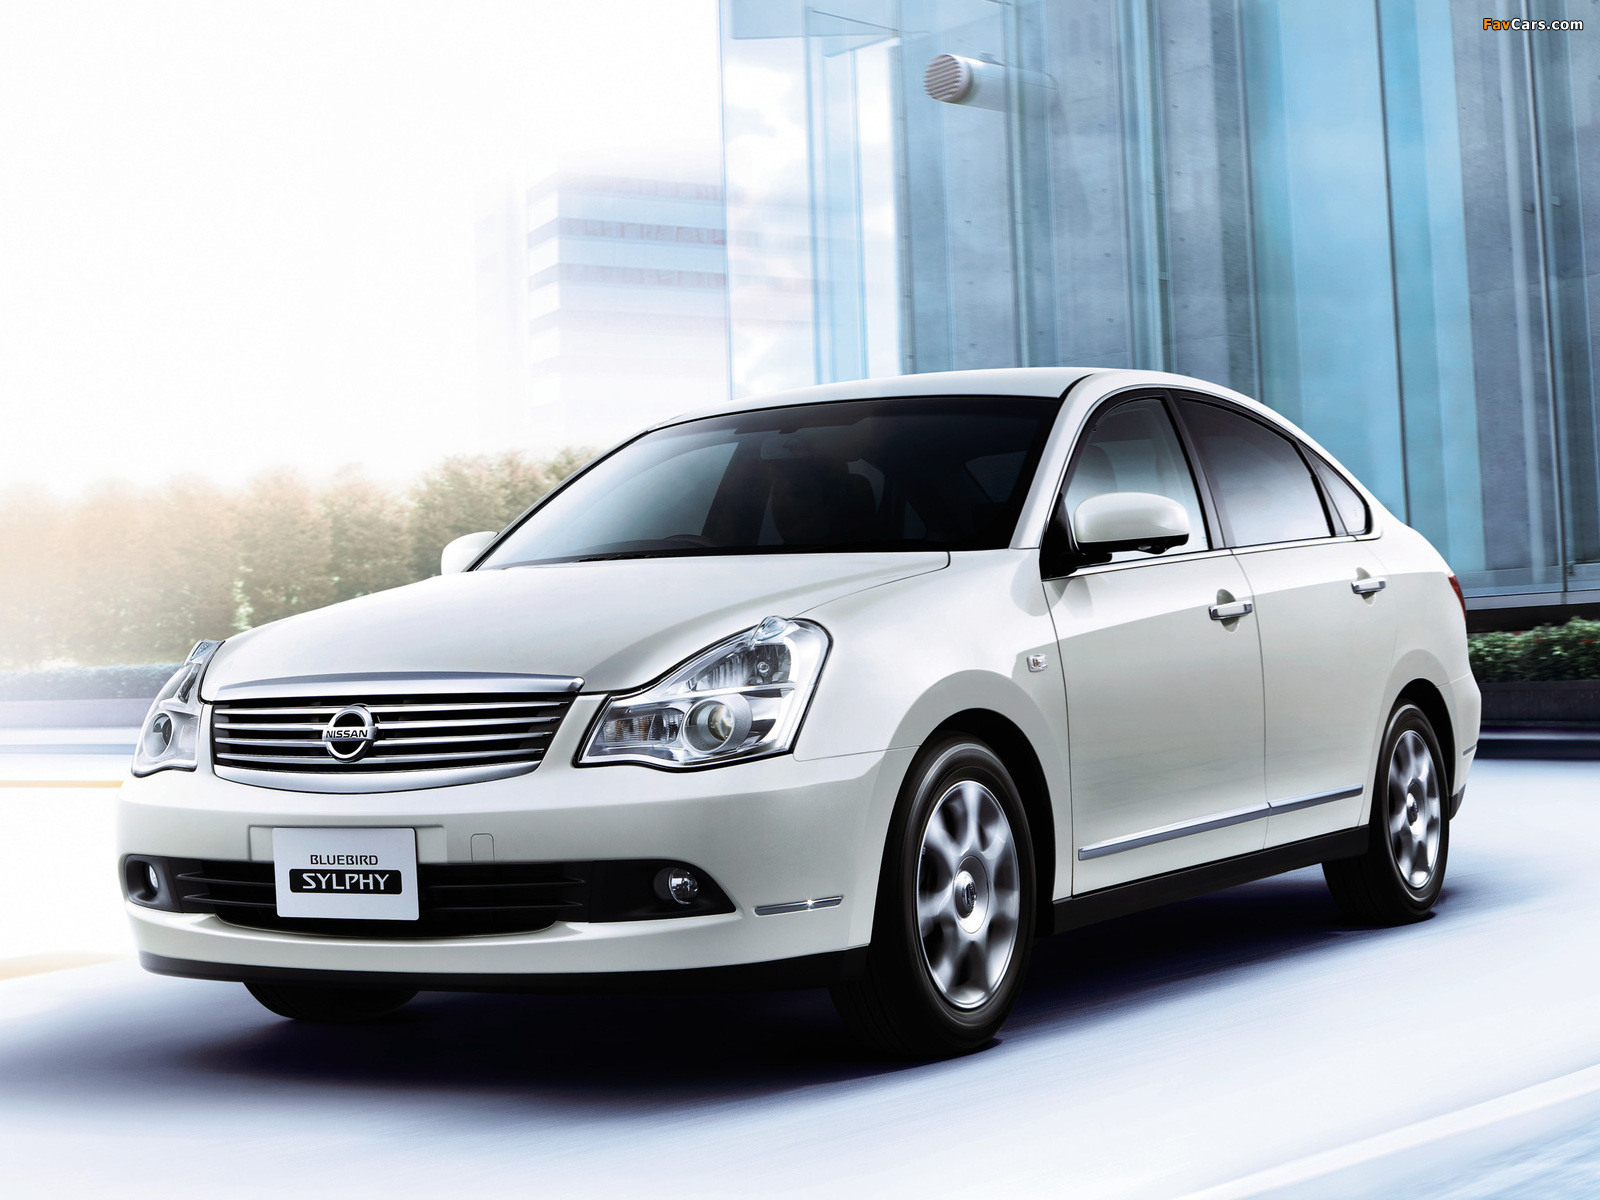 Nissan Bluebird Sylphy (G11) 2005 pictures (1600 x 1200)